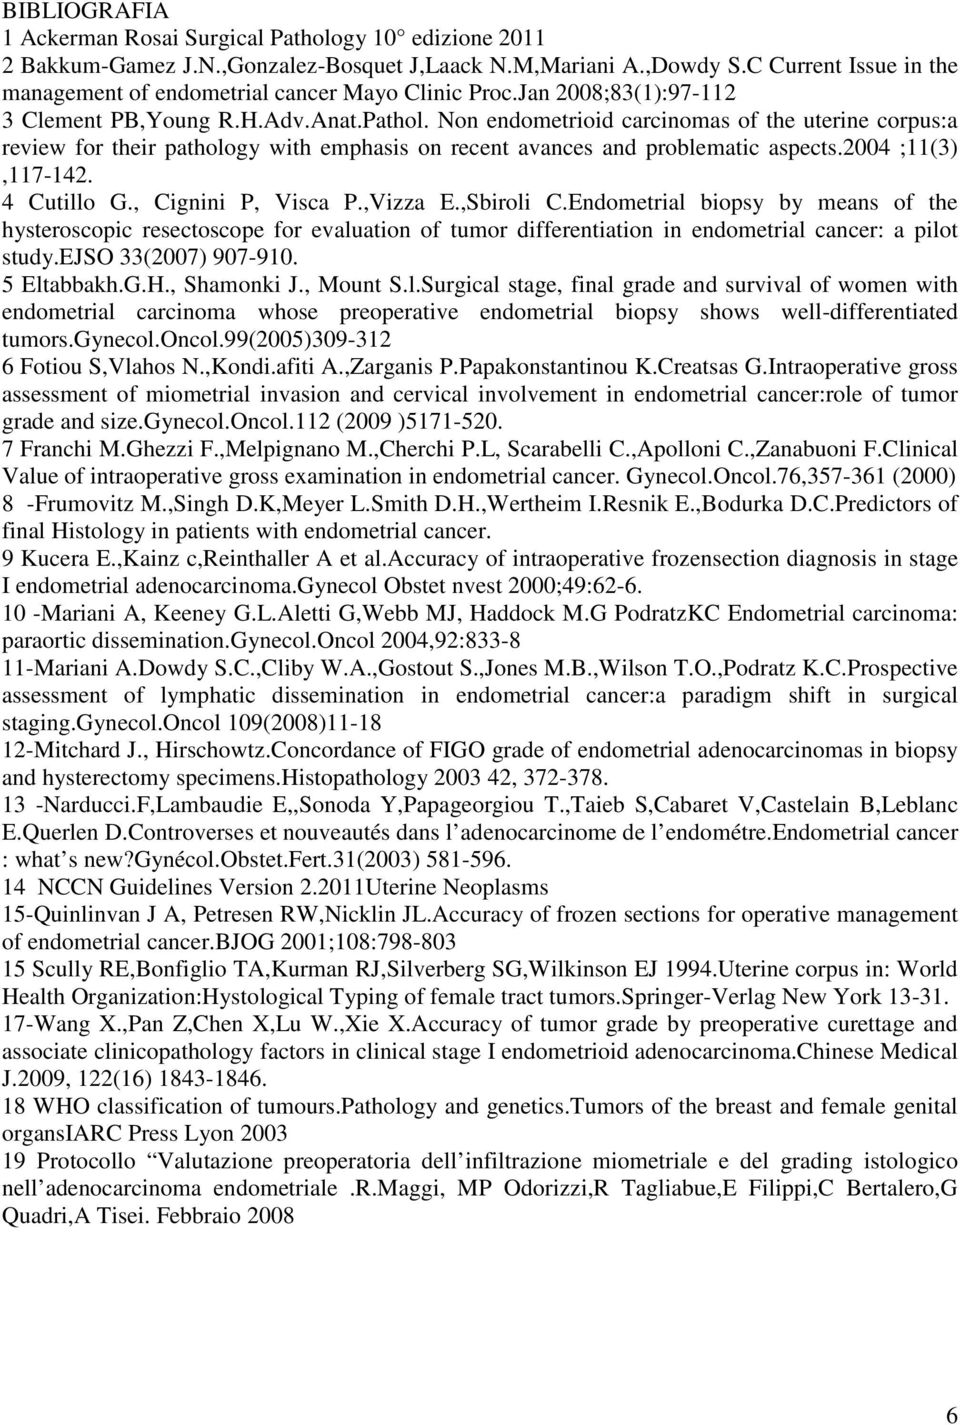 Non endometrioid carcinomas of the uterine corpus:a review for their pathology with emphasis on recent avances and problematic aspects.2004 ;11(3),117-142. 4 Cutillo G., Cignini P, Visca P.,Vizza E.